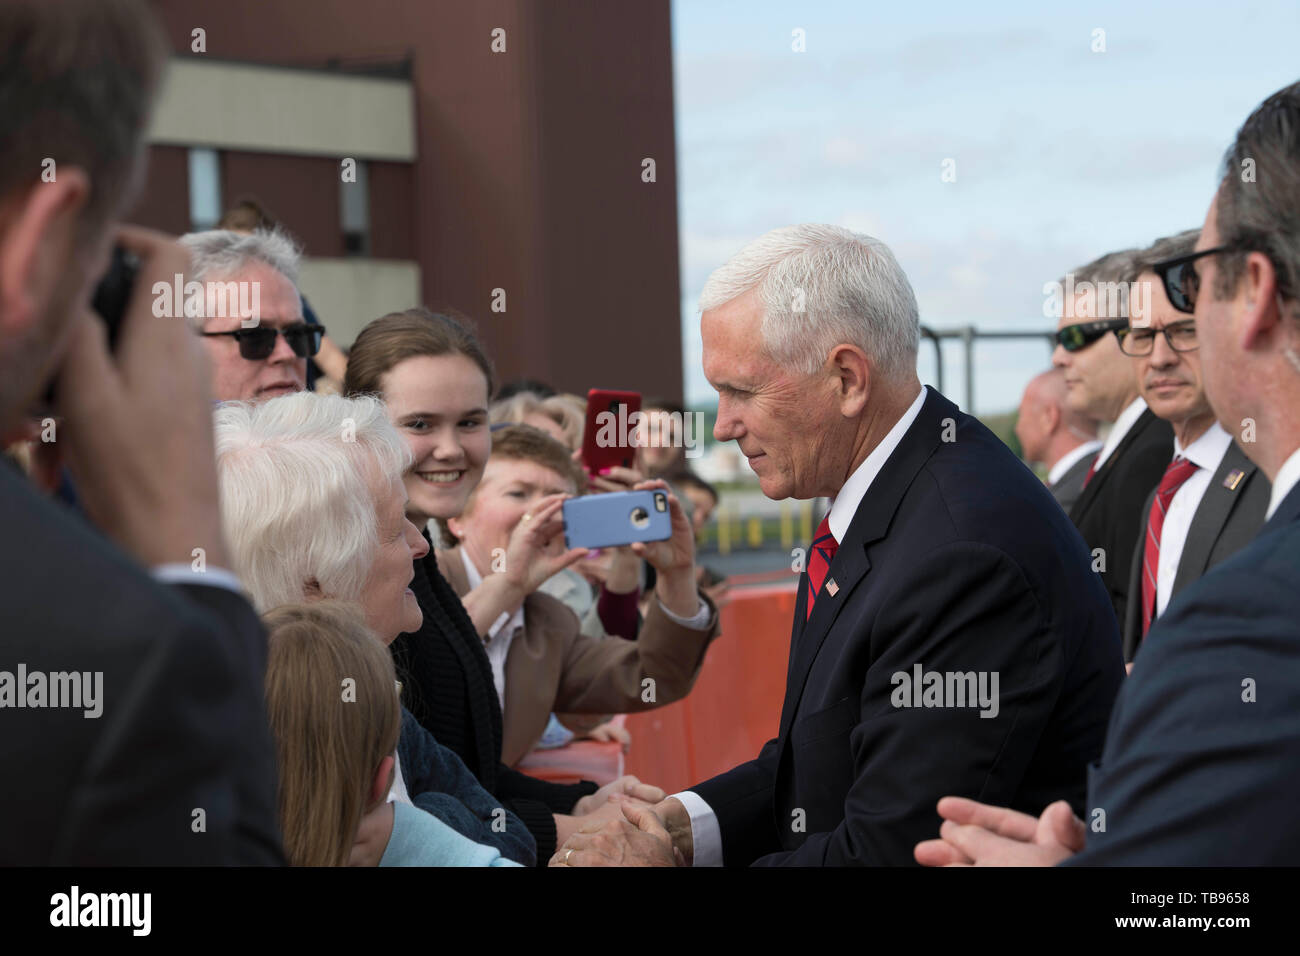 Vice President Mike Pence visits Stewart Air National Guard Base before attending the West Point Graduation Ceremony May 25th, 2019. Pence embraced a crowd before his keynote speech at the 2019 West Point Graduation. Stock Photo